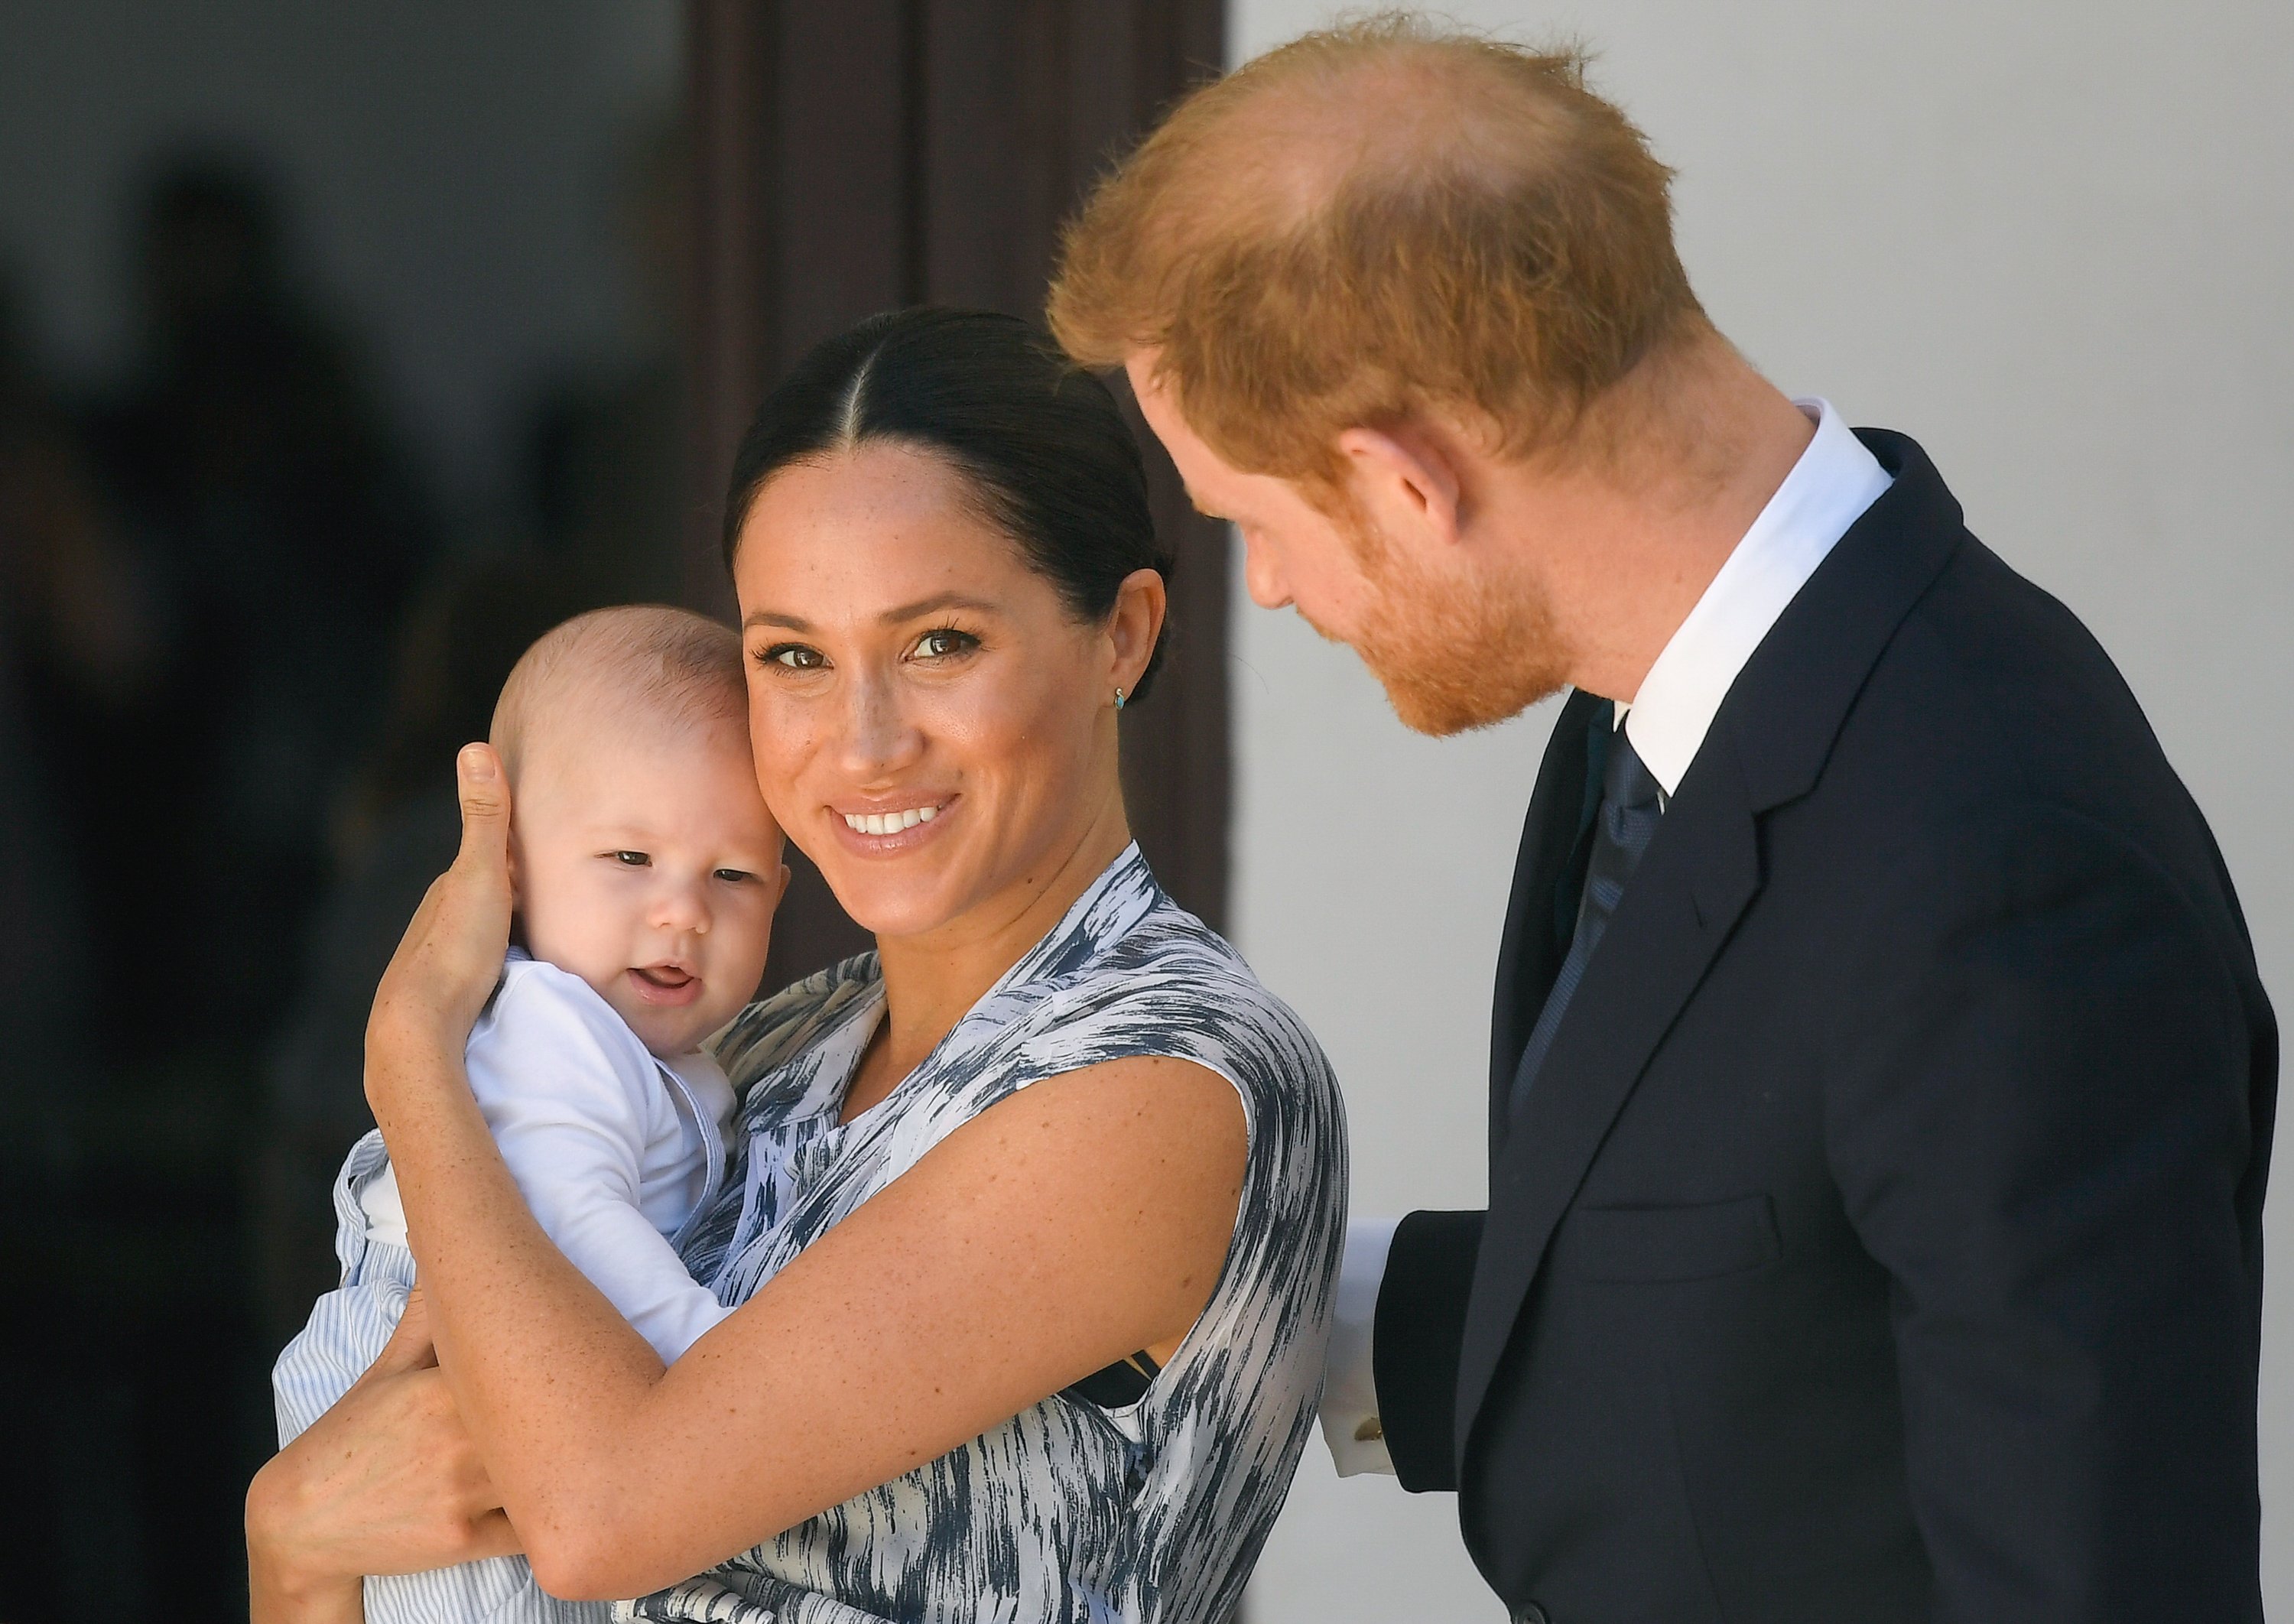 Prince Harry, Duke of Sussex, Meghan, Duchess of Sussex and their baby son Archie Mountbatten-Windsor at the Desmond & Leah Tutu Legacy Foundation on September 25, 2019 in Cape Town, South Africa | Source: Getty Images